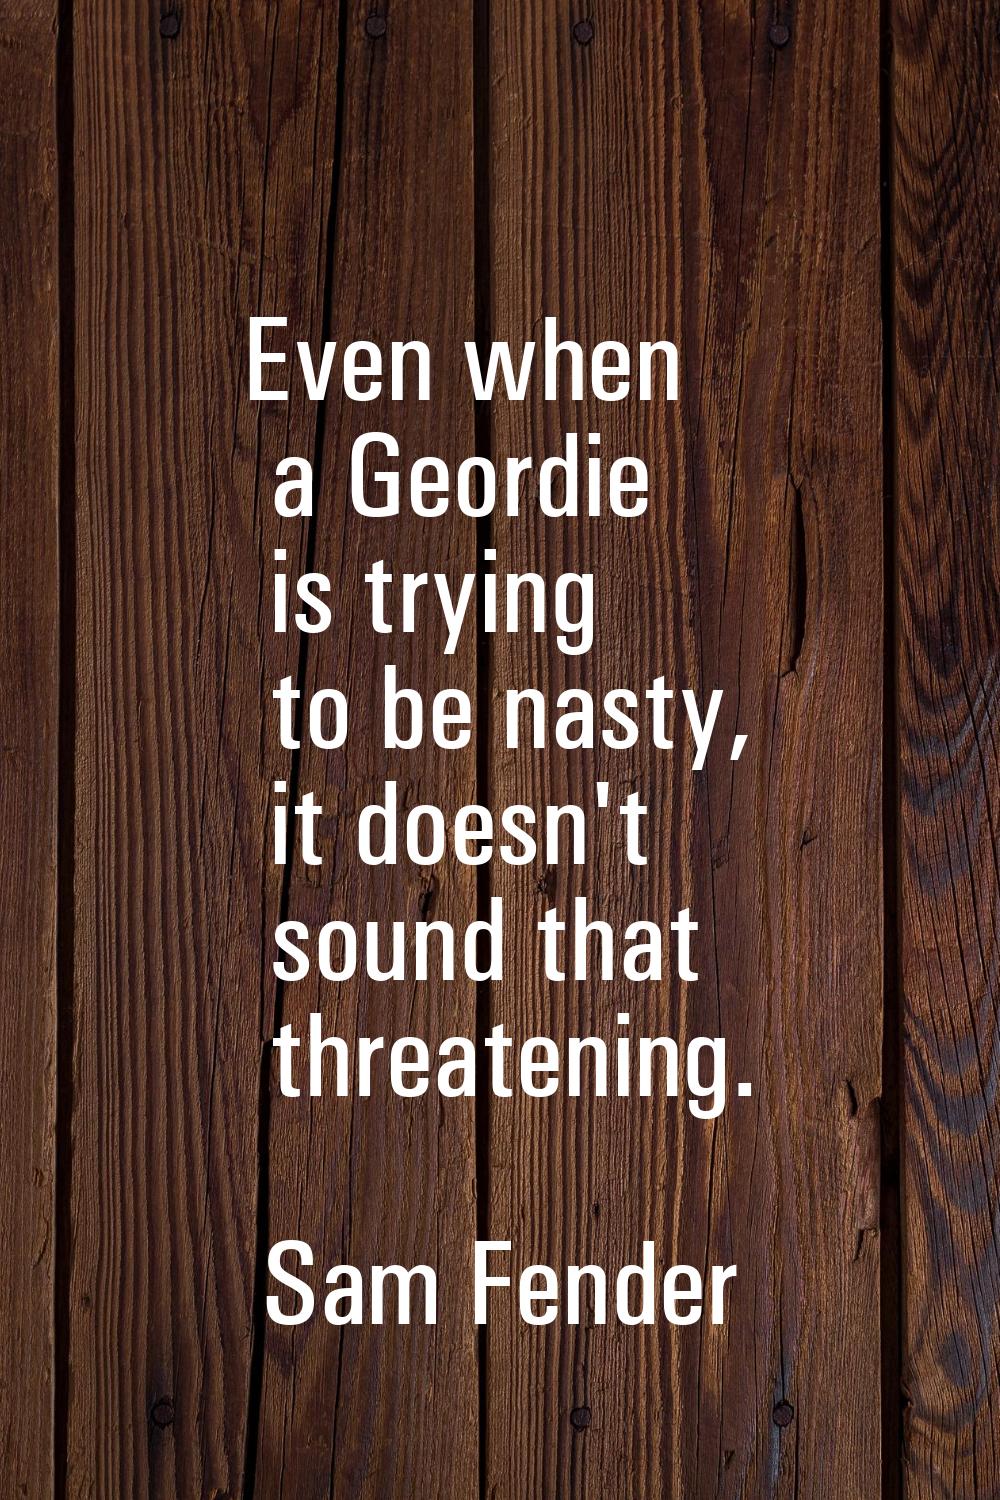 Even when a Geordie is trying to be nasty, it doesn't sound that threatening.